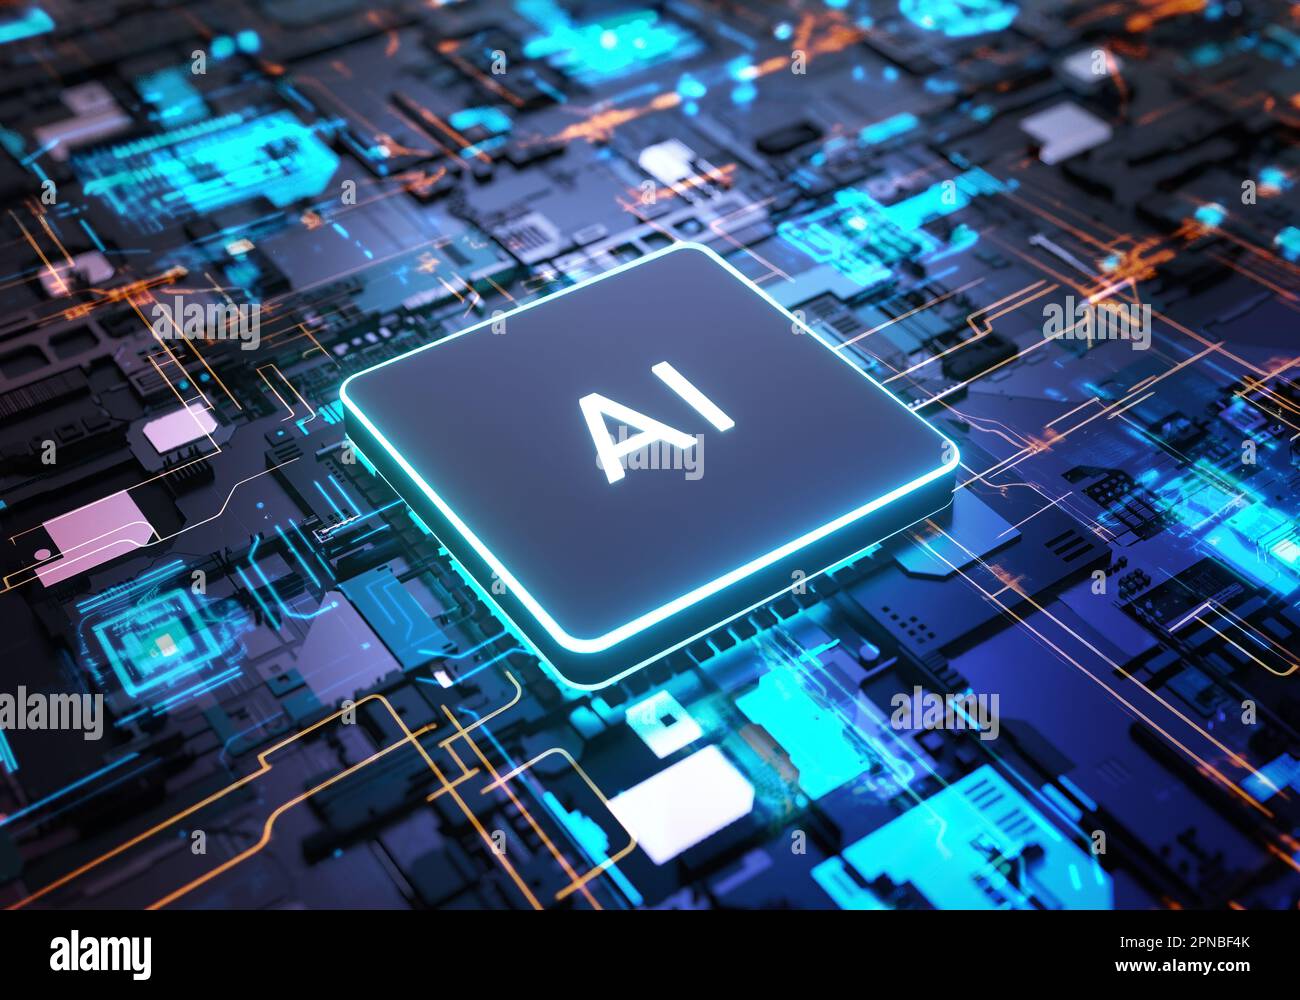 AI, Artificial Intelligence chipset processor on circuit board working on data analysis, machine learning and futuristic technology concept Stock Photo